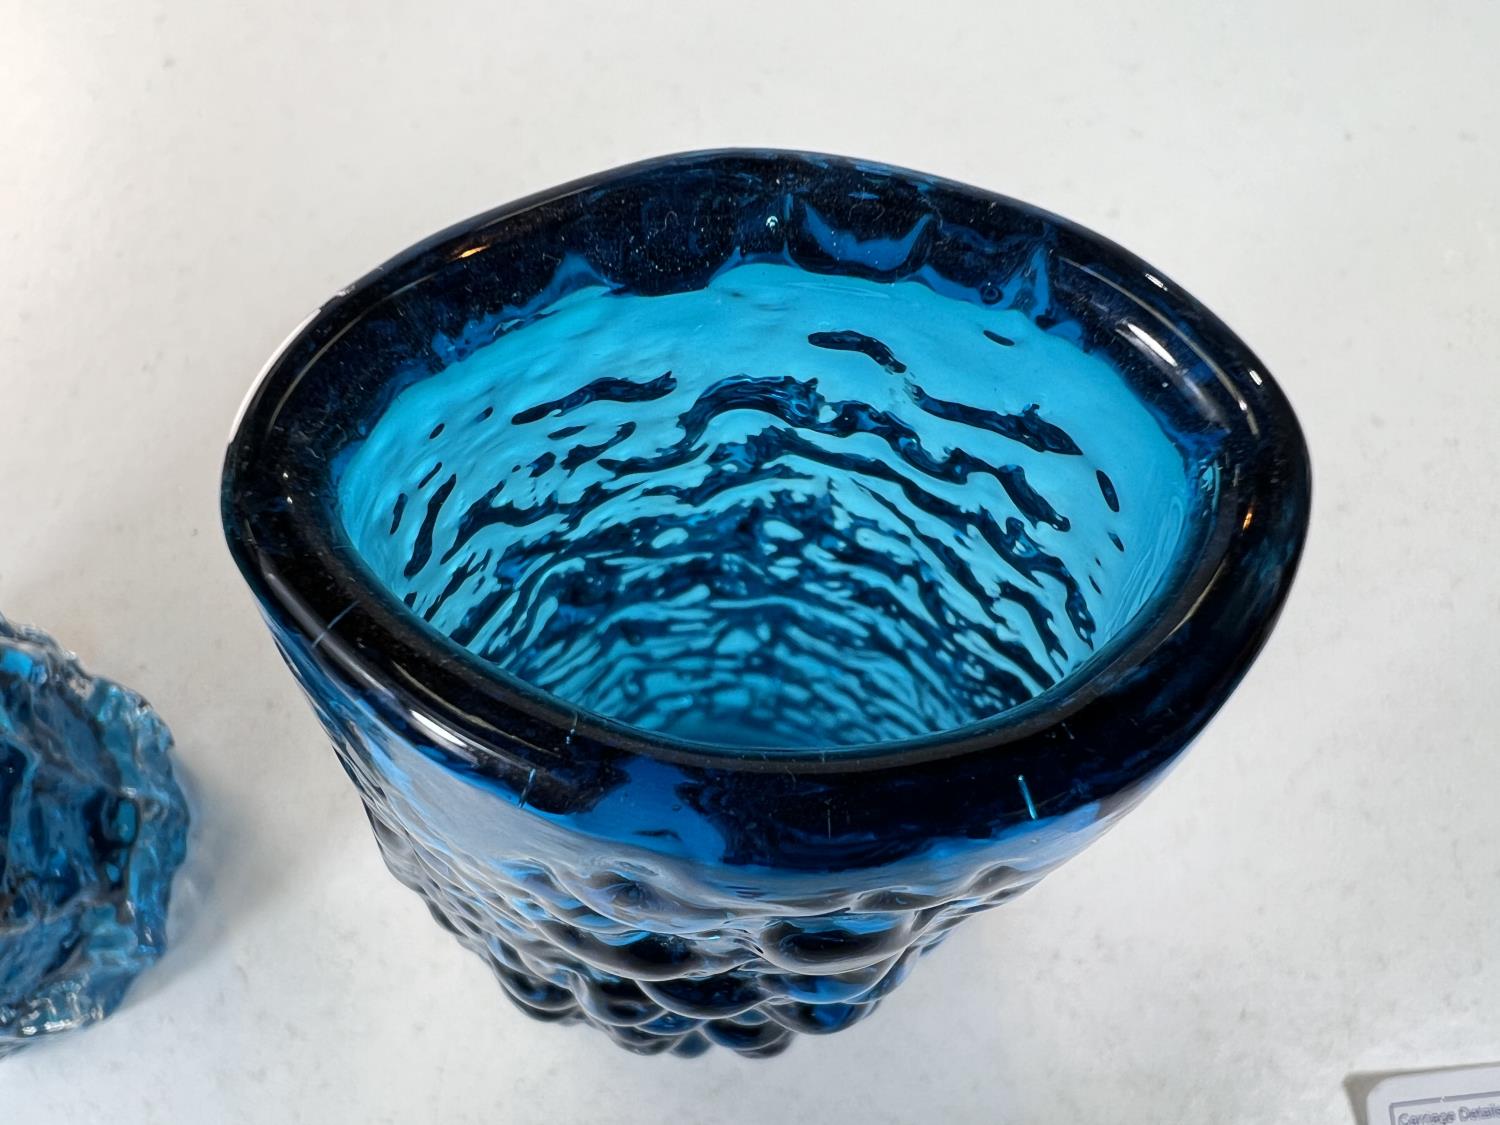 Whitefriars Geoffrey Baxter designed 'Volcano' glass vase in Kingfisher blue pattern 9717, - Image 4 of 4